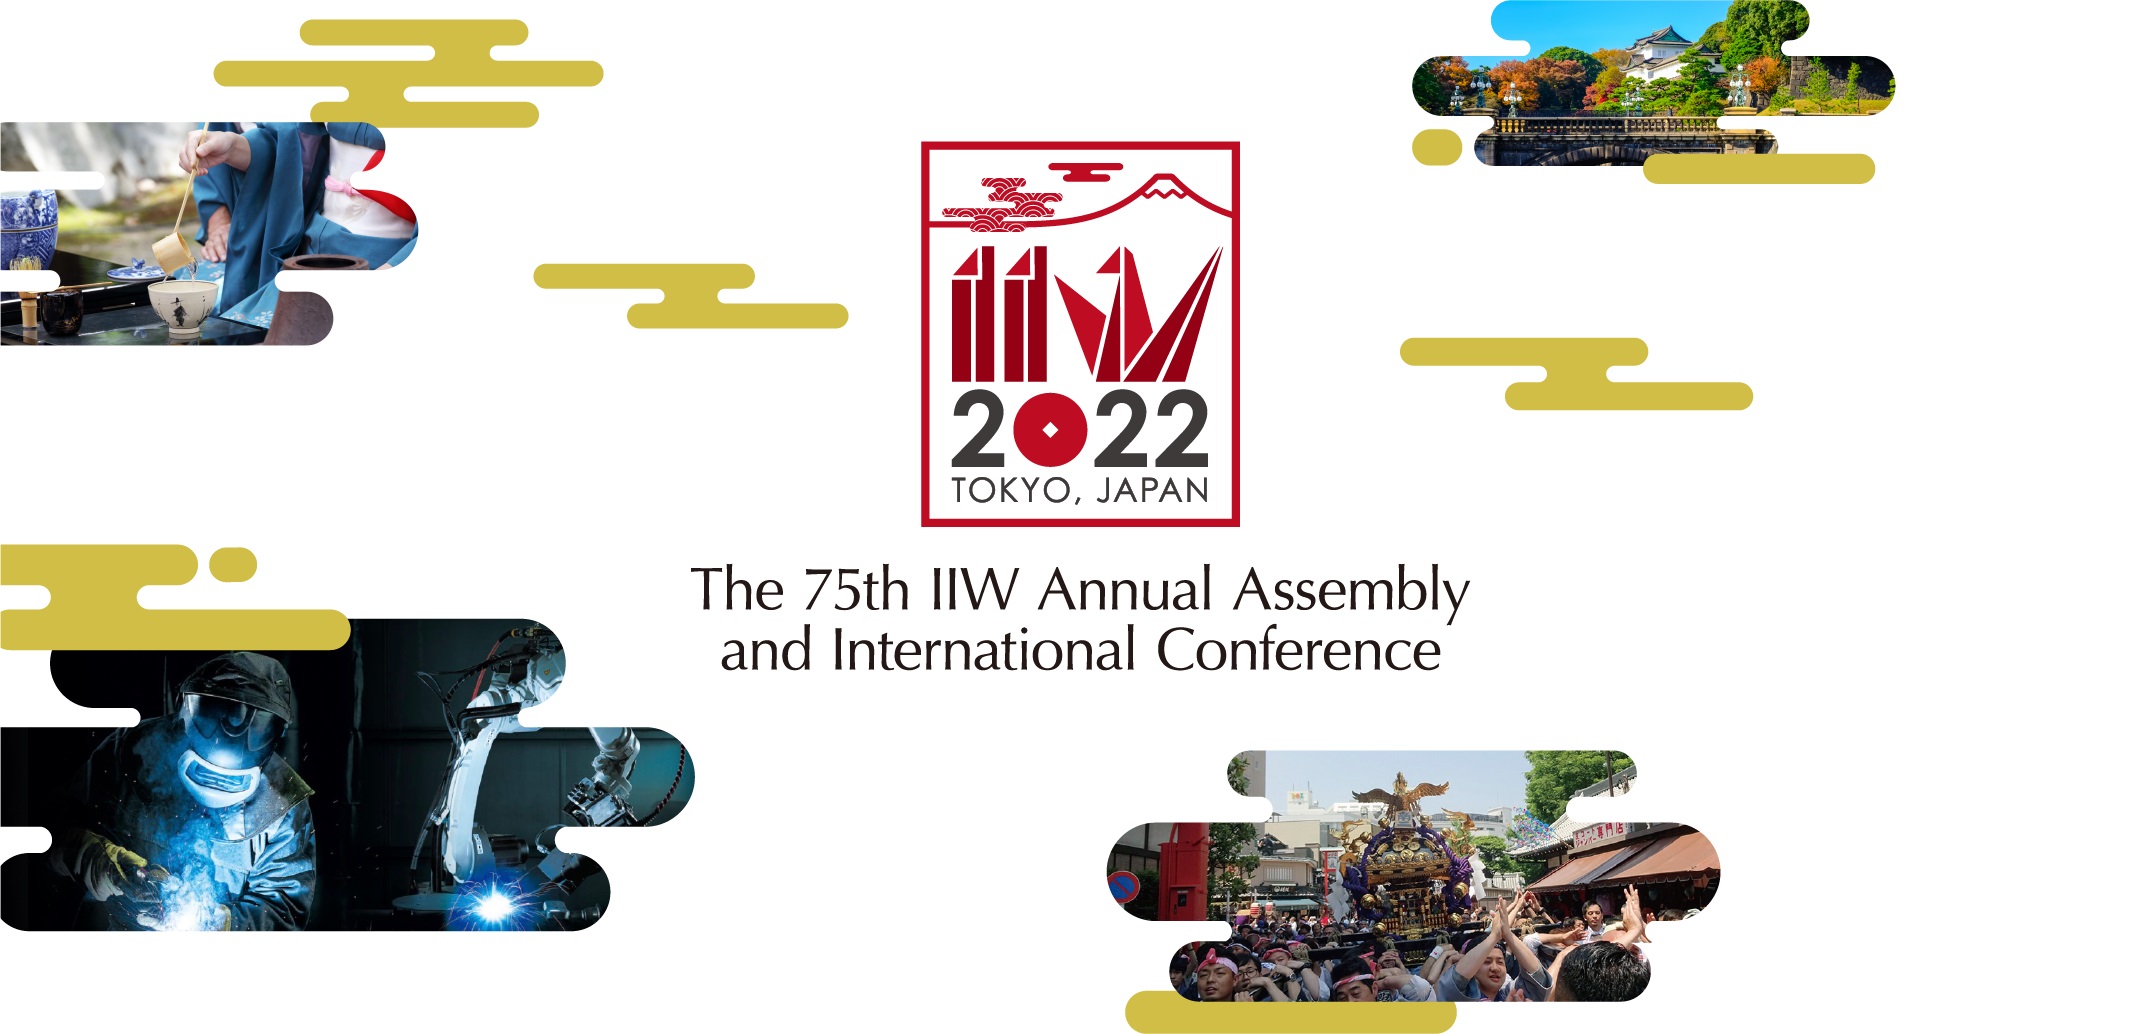 CVE to Present at the IIW Assembly and Conference